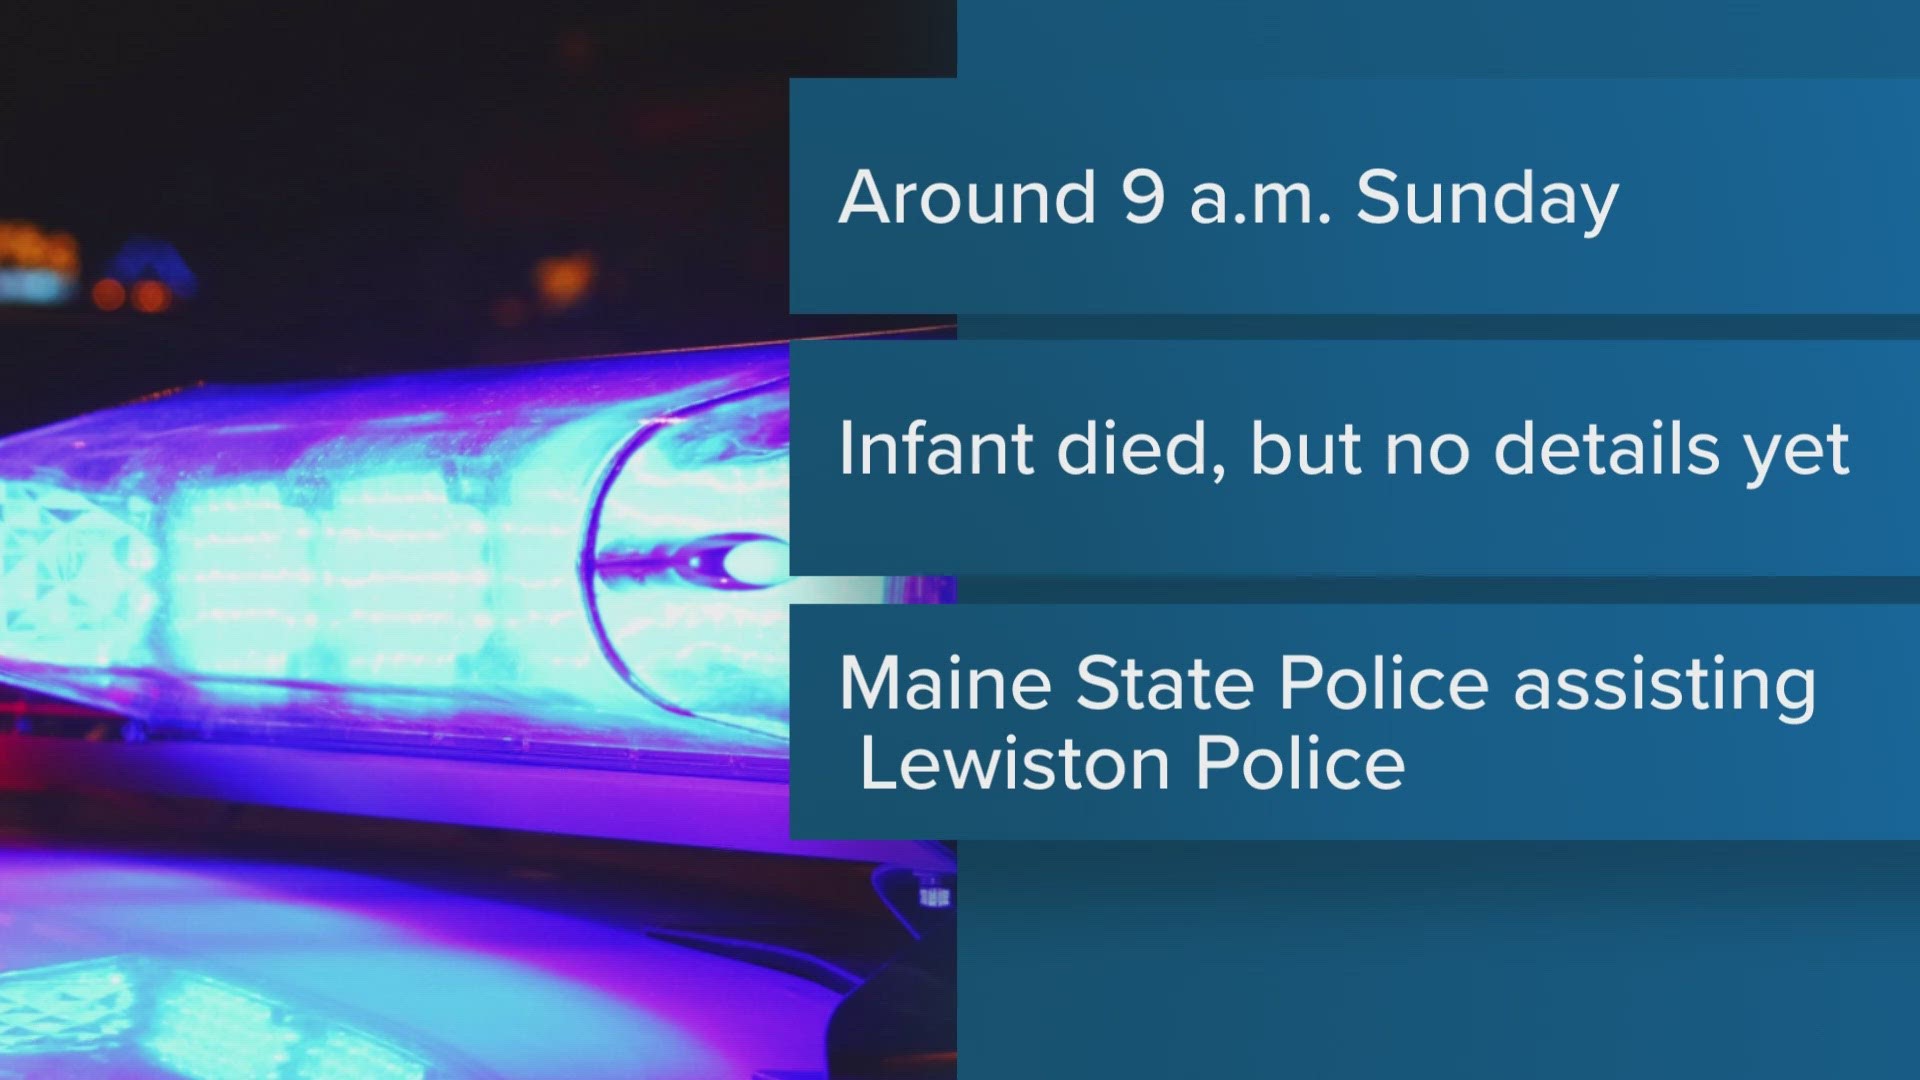 Officials were called to 709 Main Street in Lewiston shortly before 9 a.m. Sunday, Maine Department of Public Safety spokesperson Shannon Moss told NEWS CENTER Maine